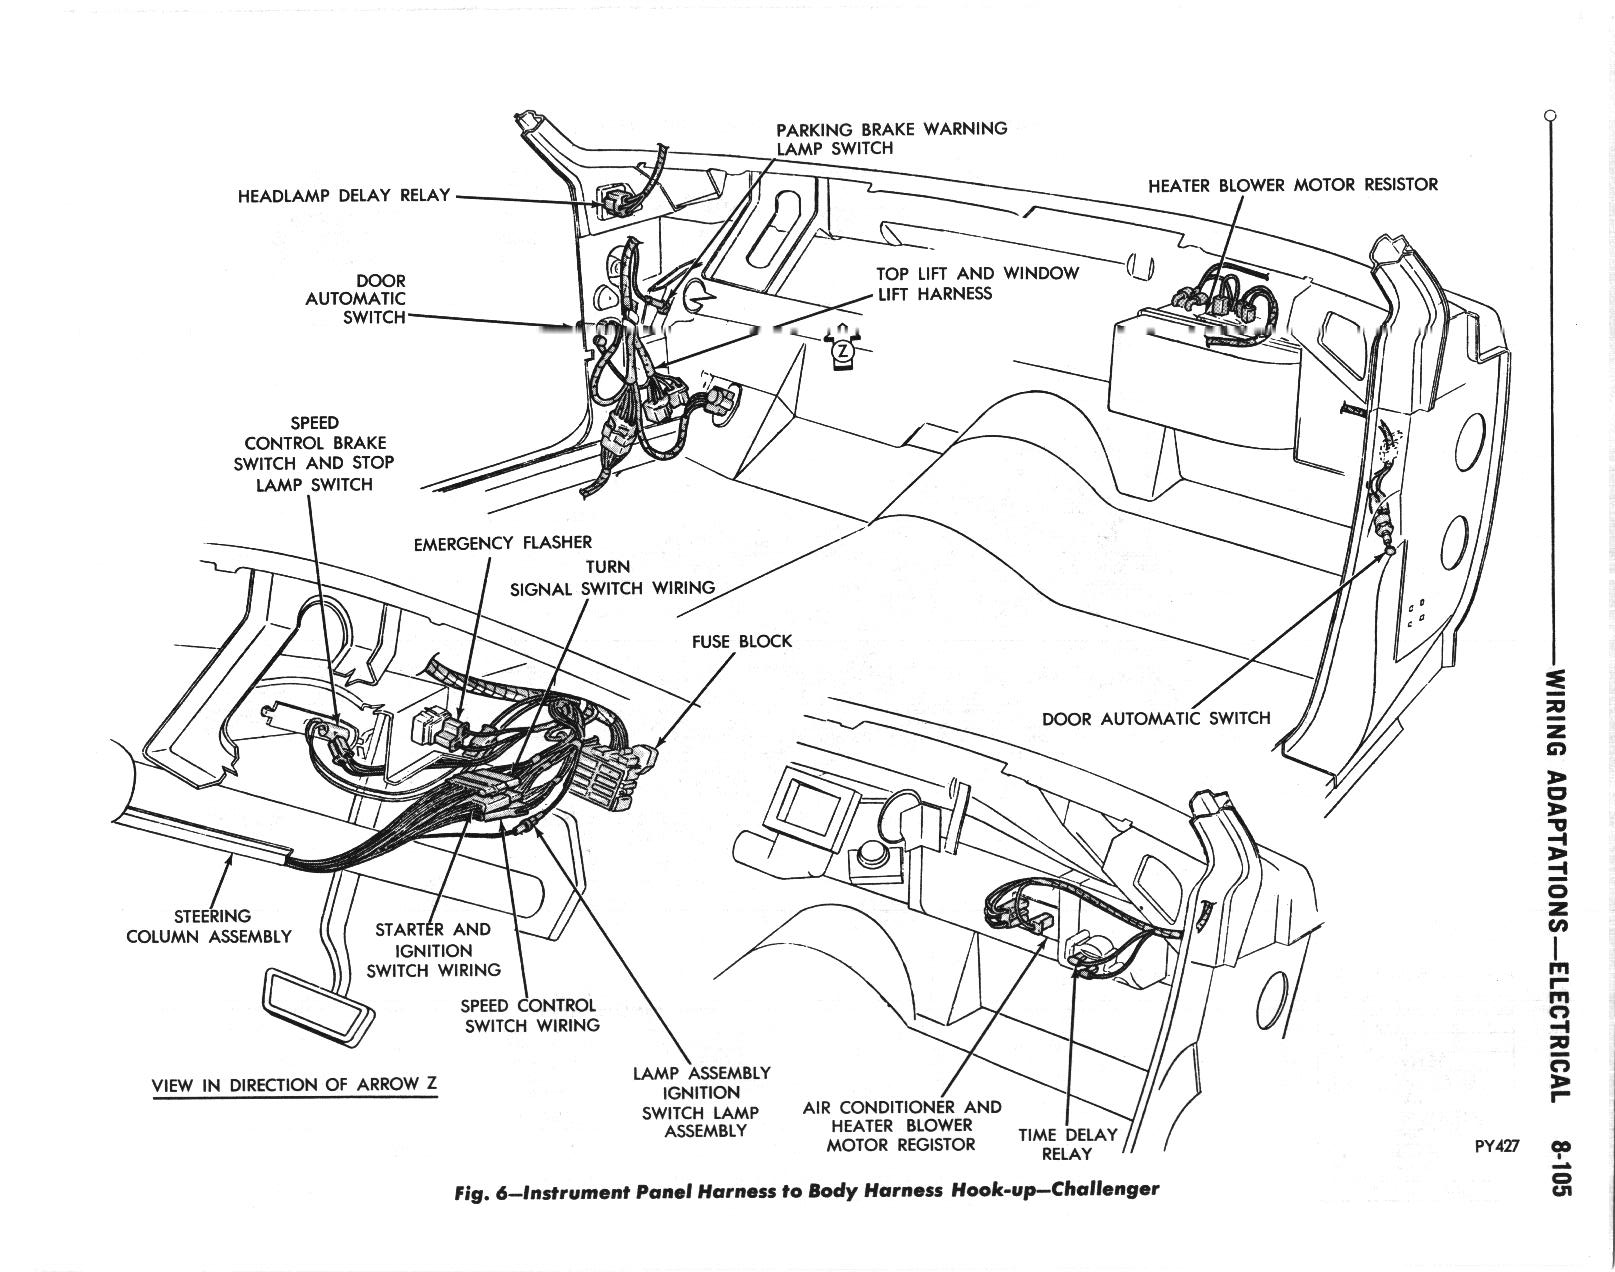 [DIAGRAM] 1972 Dodge Challenger Wiring Diagram FULL Version HD Quality